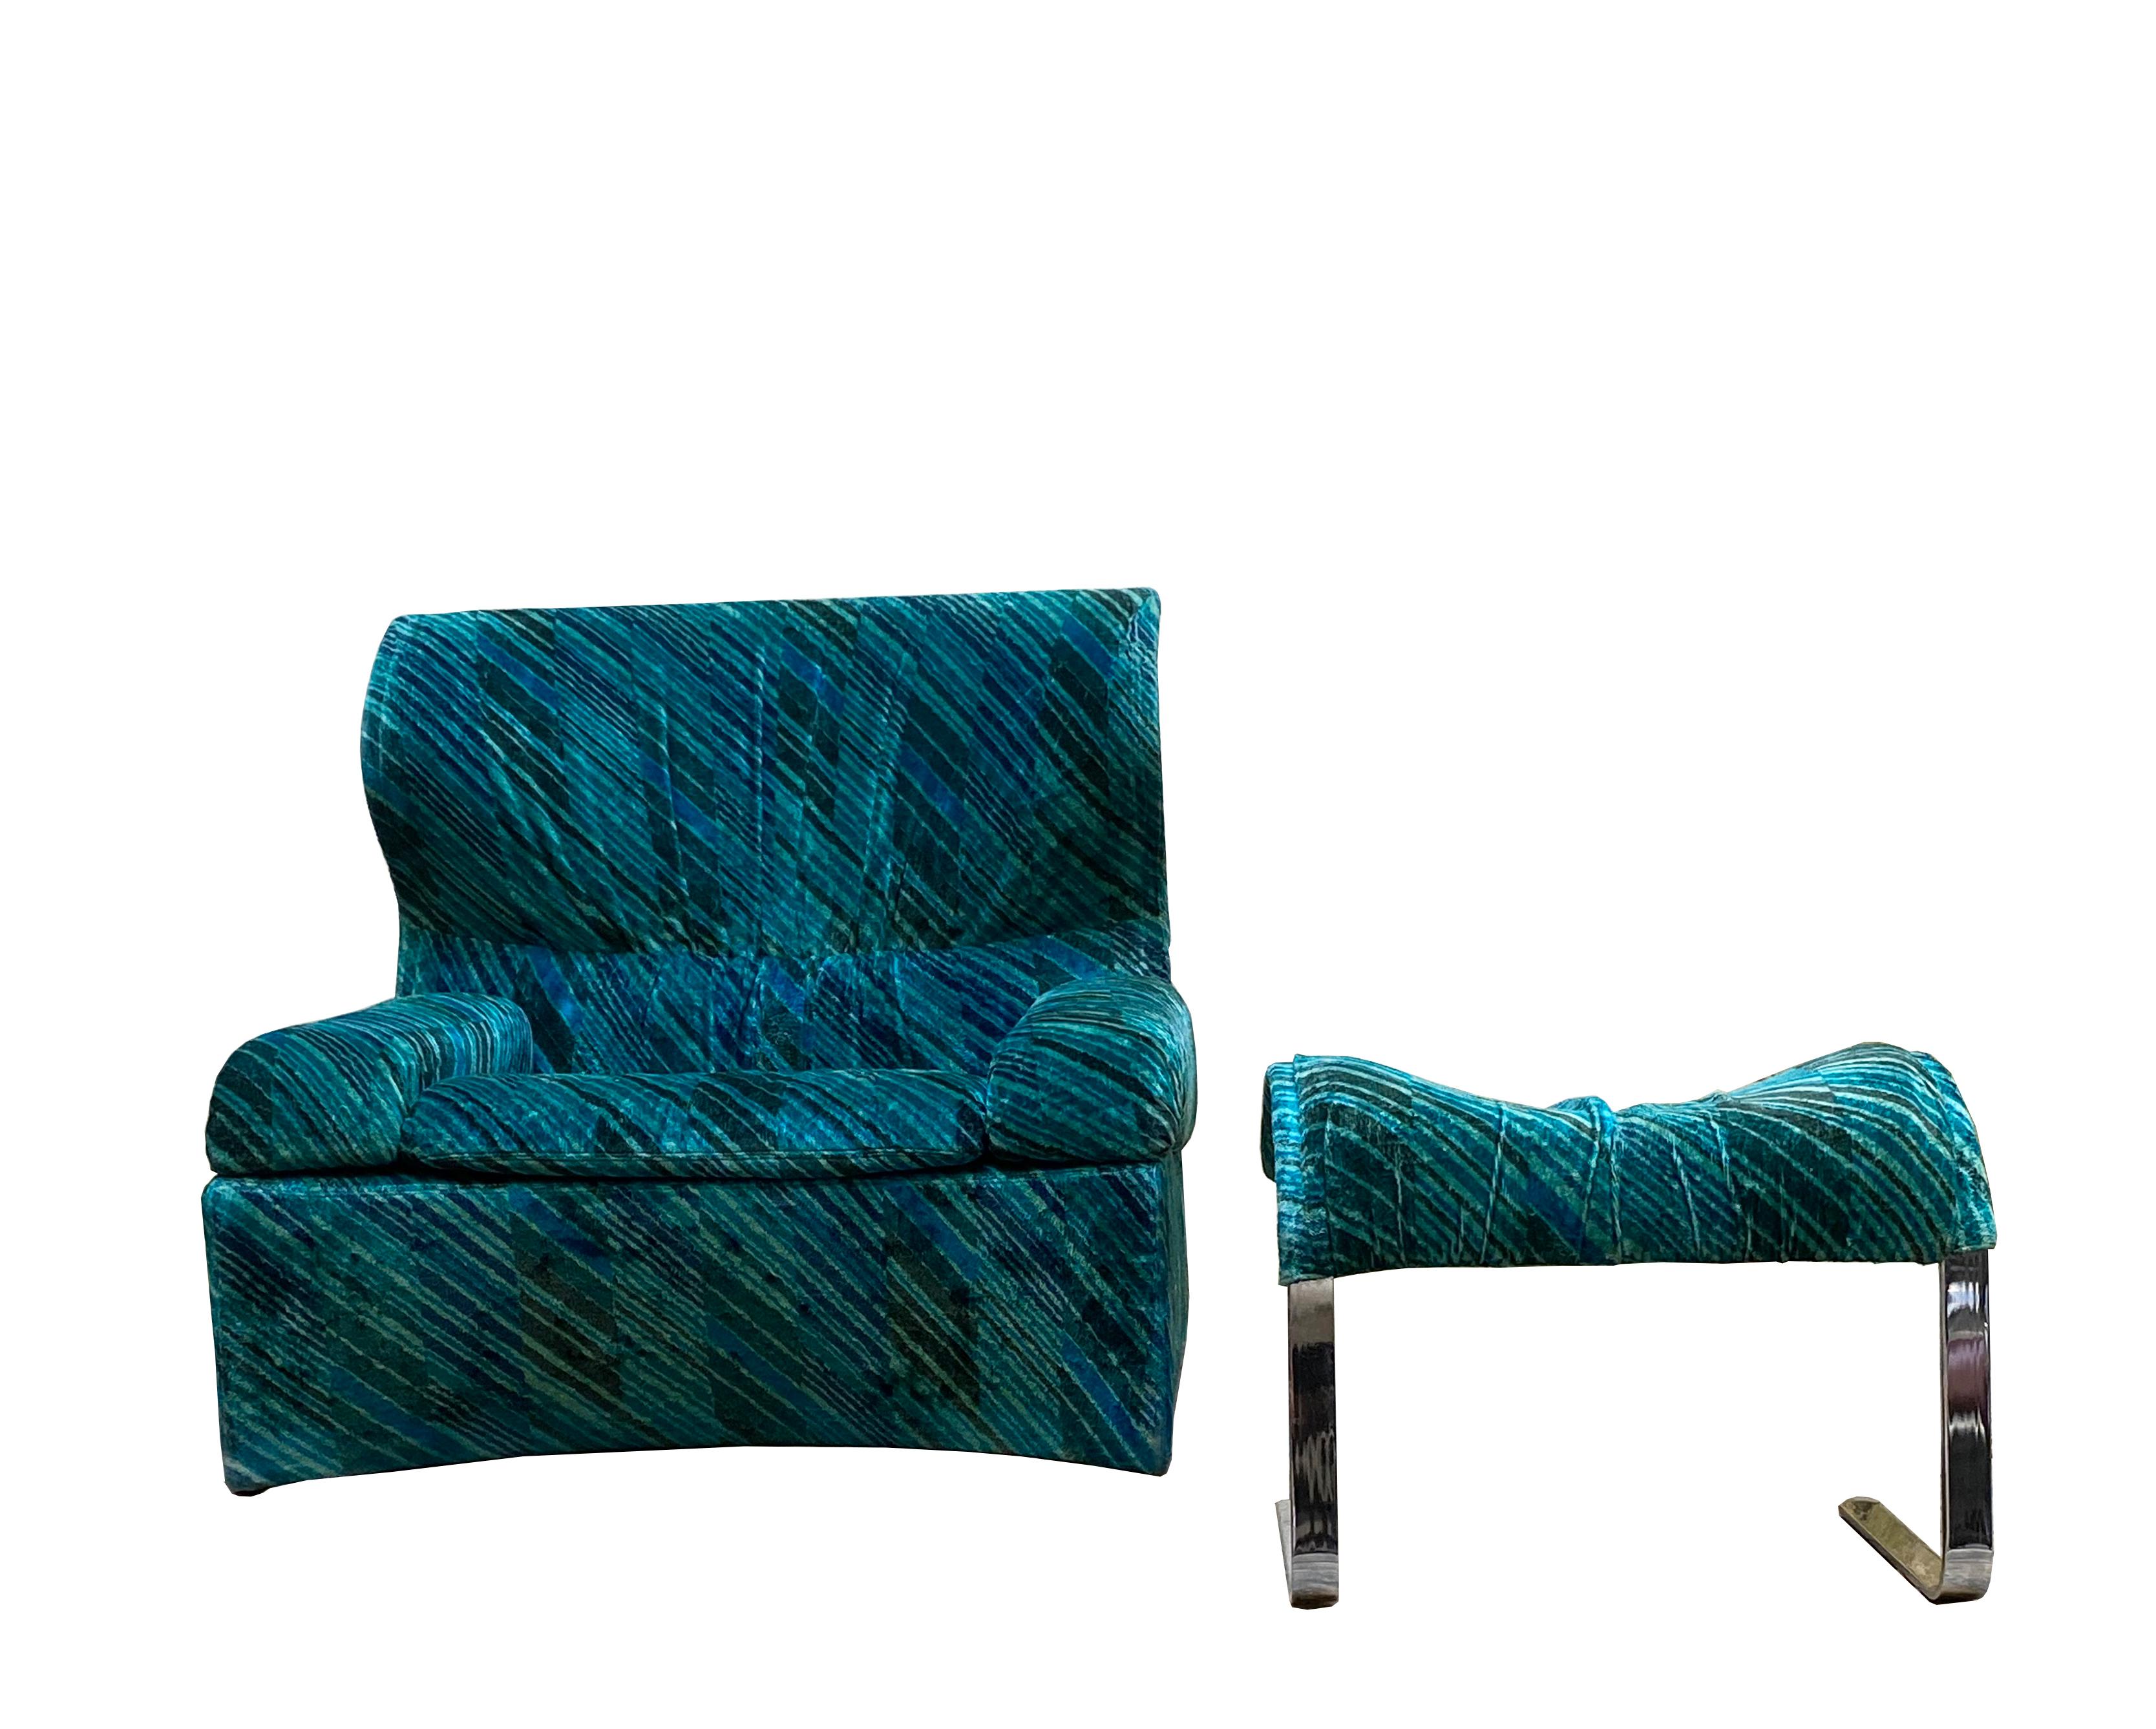 This 'Vela Alta' lounge chair complete with footrest was designed by Giovanni Offredi in the 1970s and produced in Italy by Saporiti. The chair has a curved back and both chair and stool are made of original green and turquoise velvet of the time.